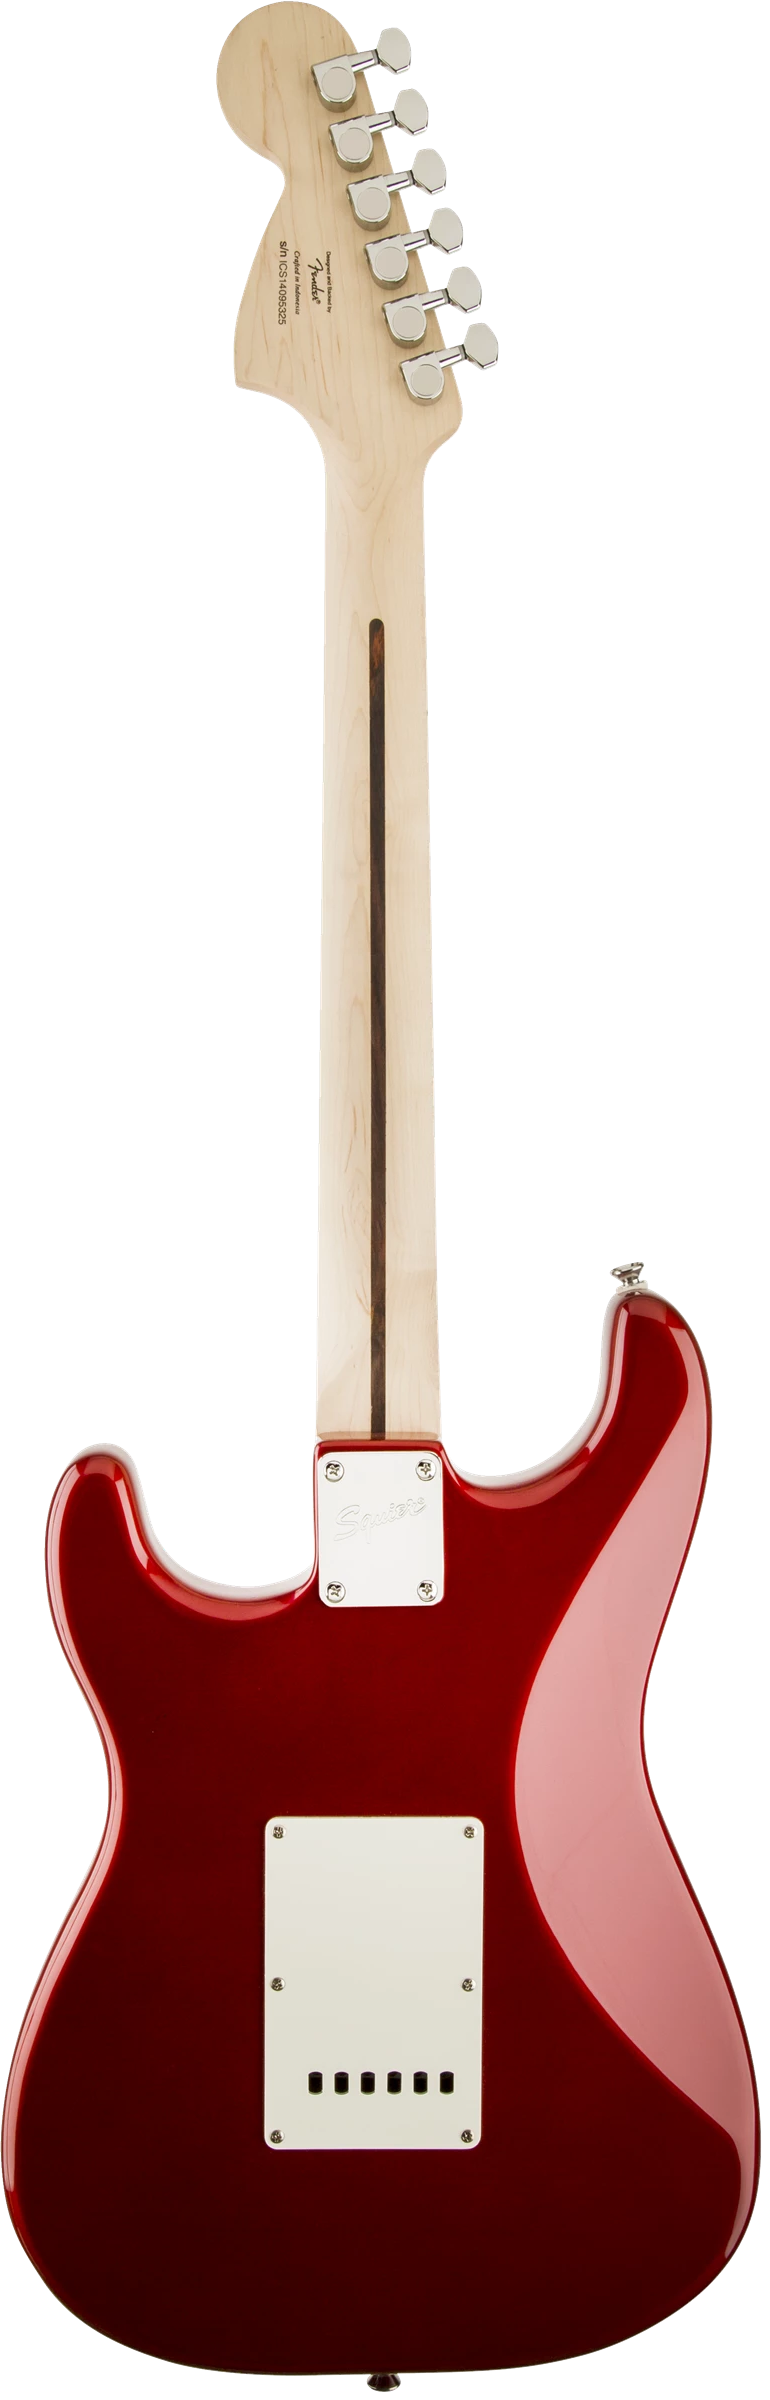 Squier Standard Stratocaster Candy Apple Red MN - Regent Sounds